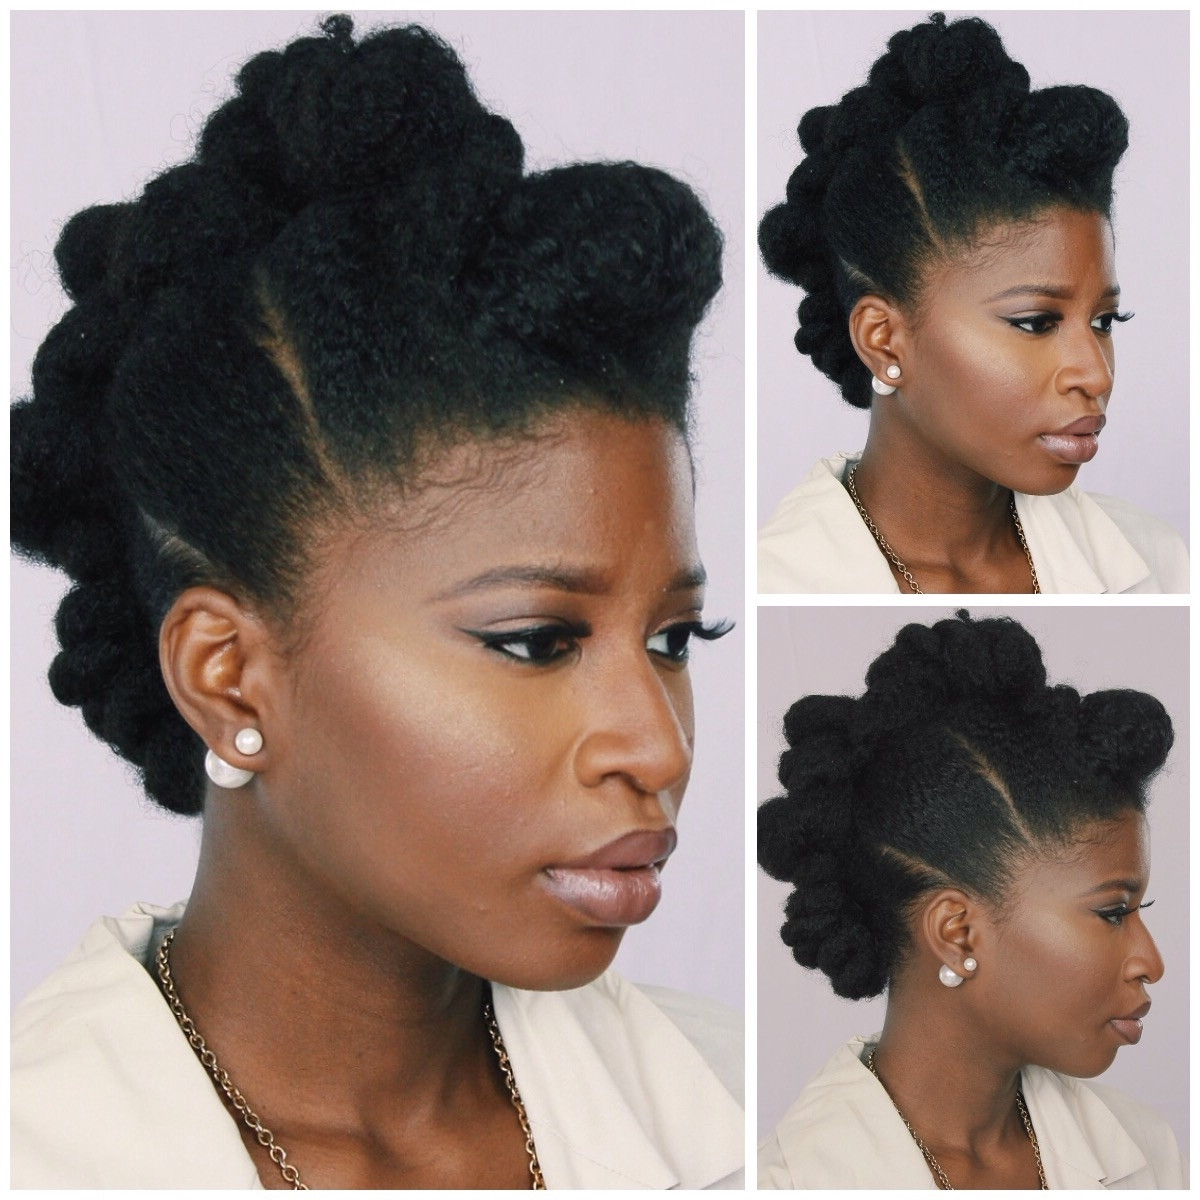 Afro Caribbean Wedding Hairstyles
 15 Inspirations of Wedding Hairstyles For Natural Afro Hair